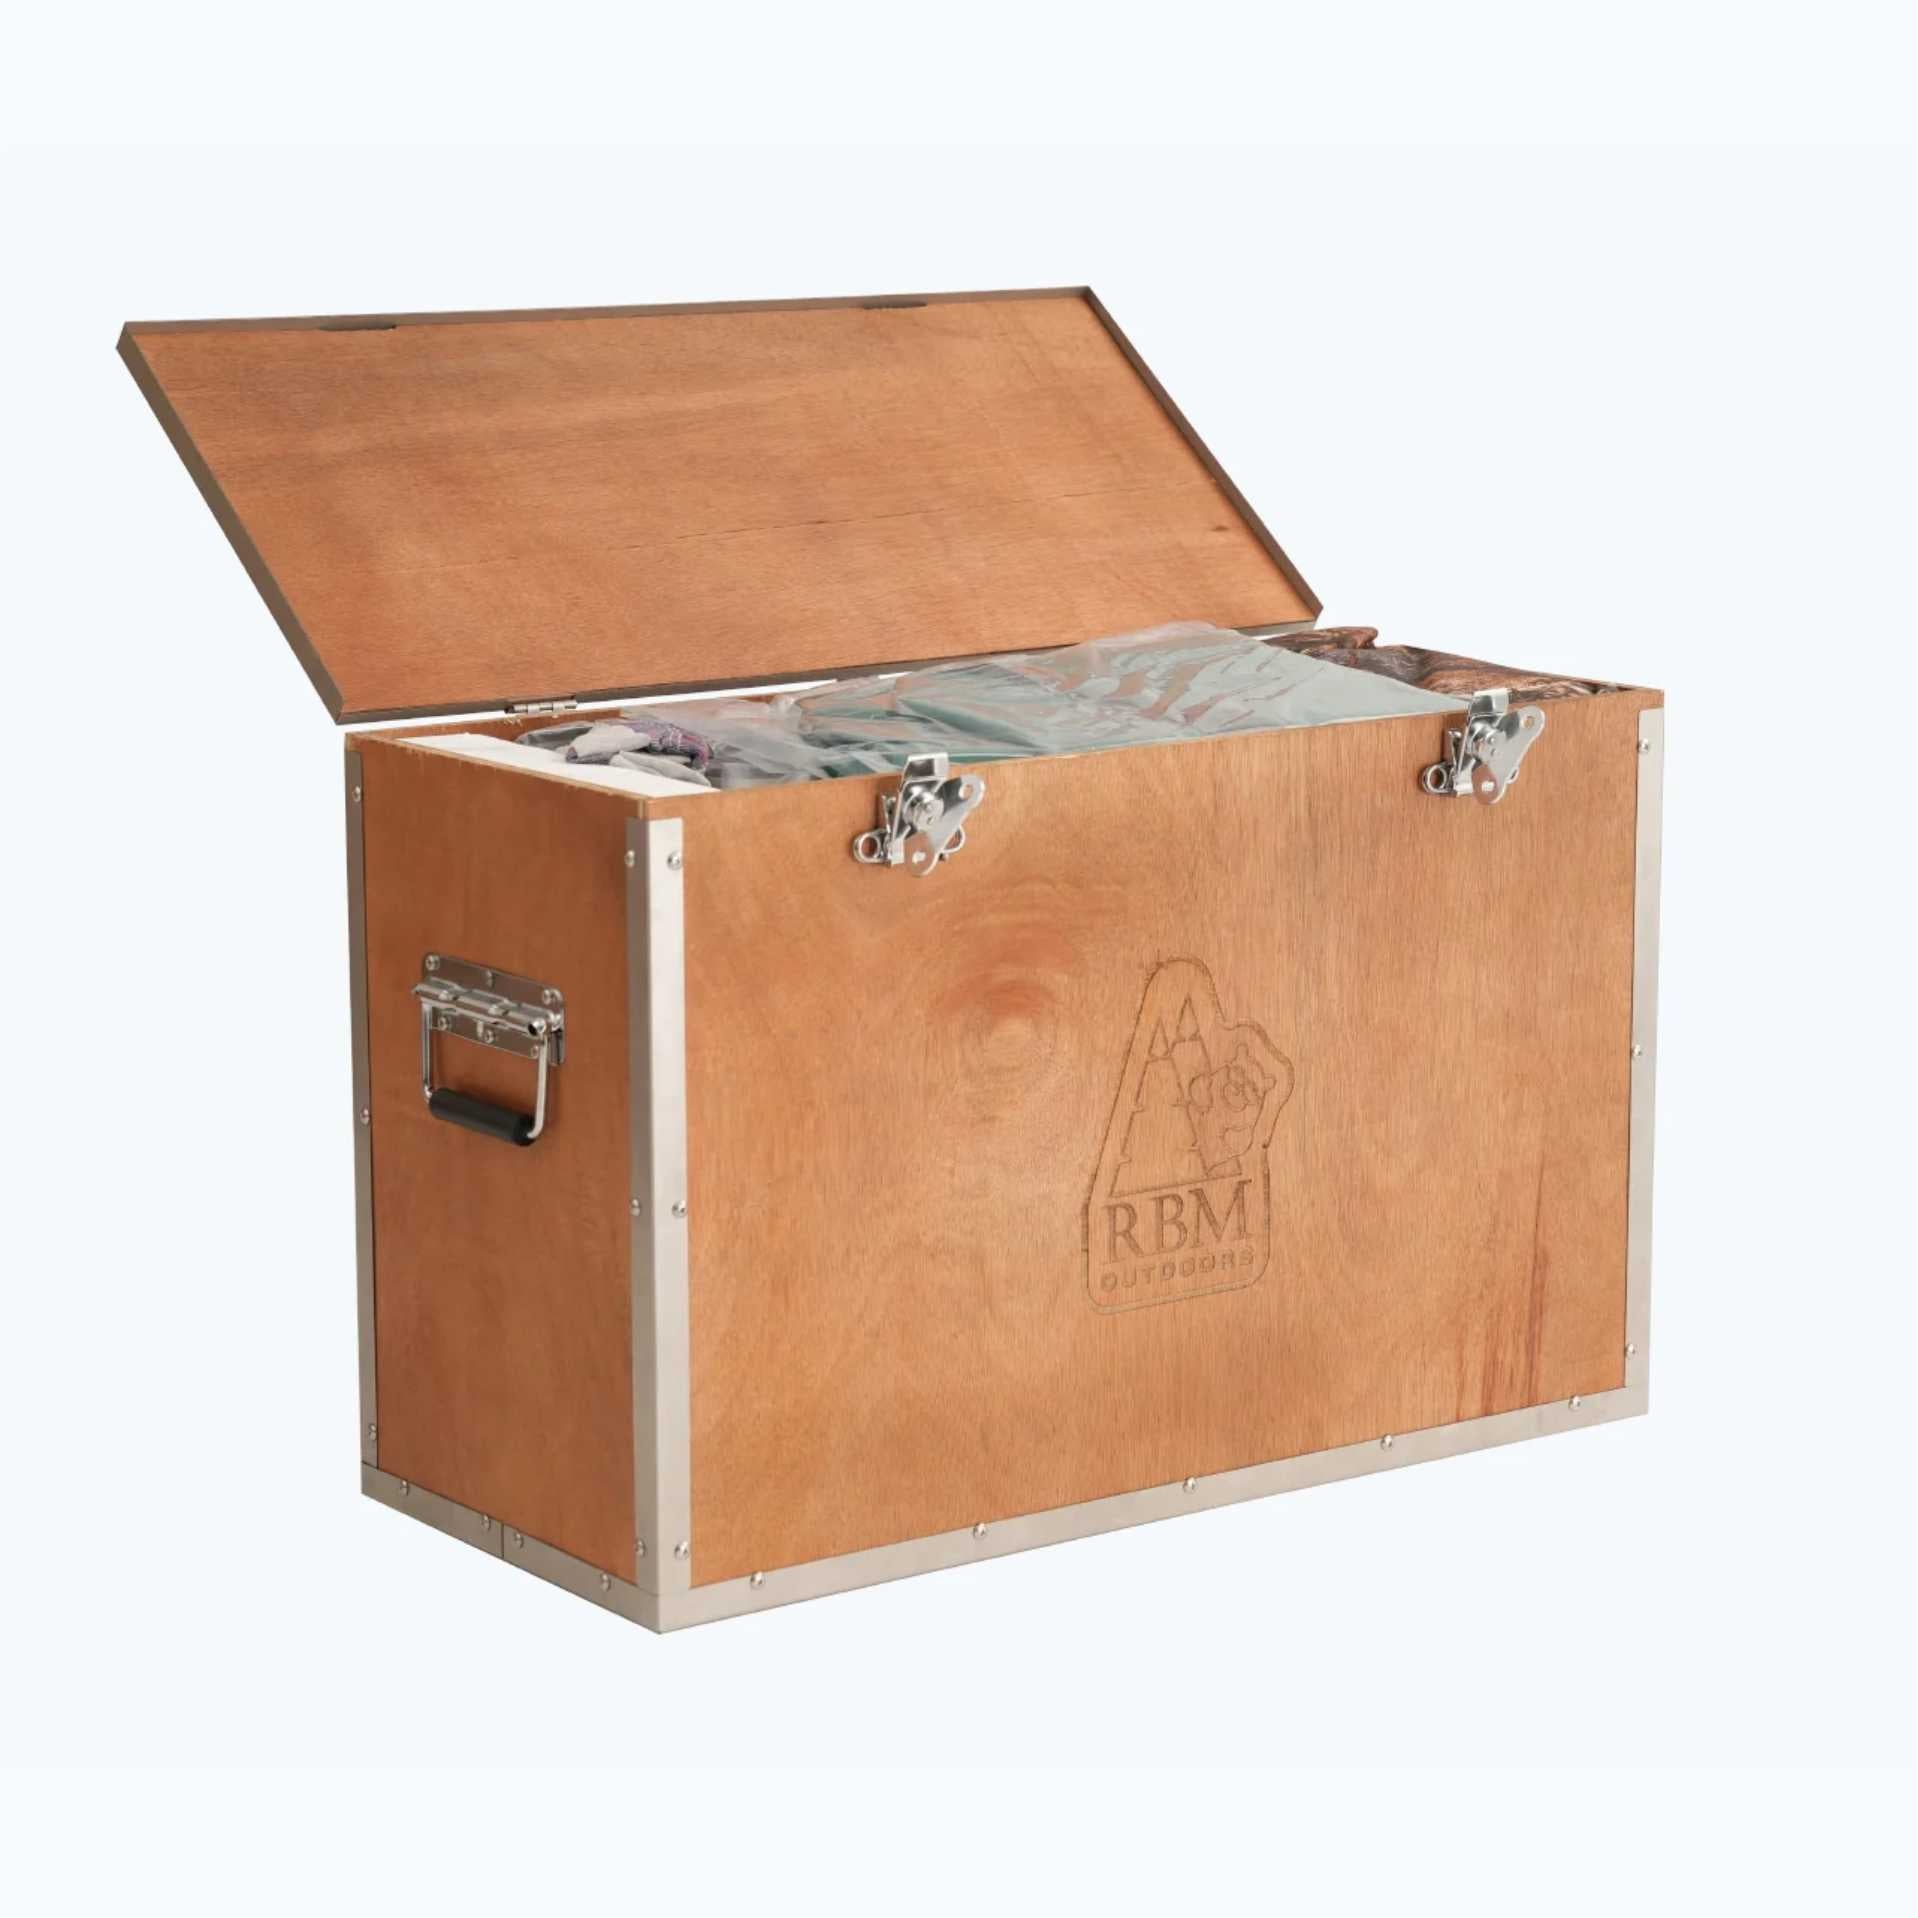 Best Hot Tents - Medium Wood Stove With Fire-Resistant Glass "Caminus M"